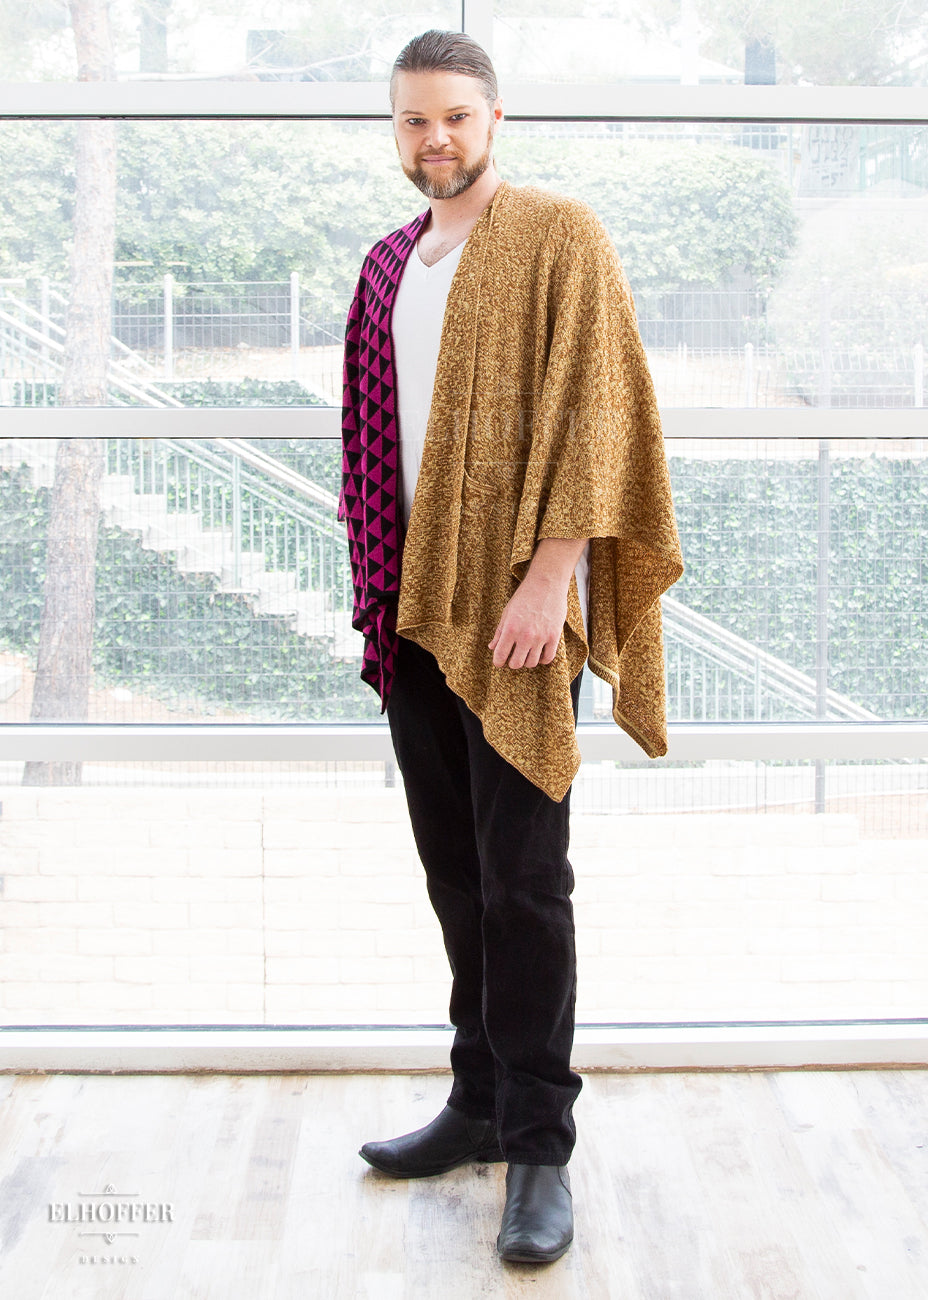 Bryan stands showing his left side, the golden colored half of the poncho.